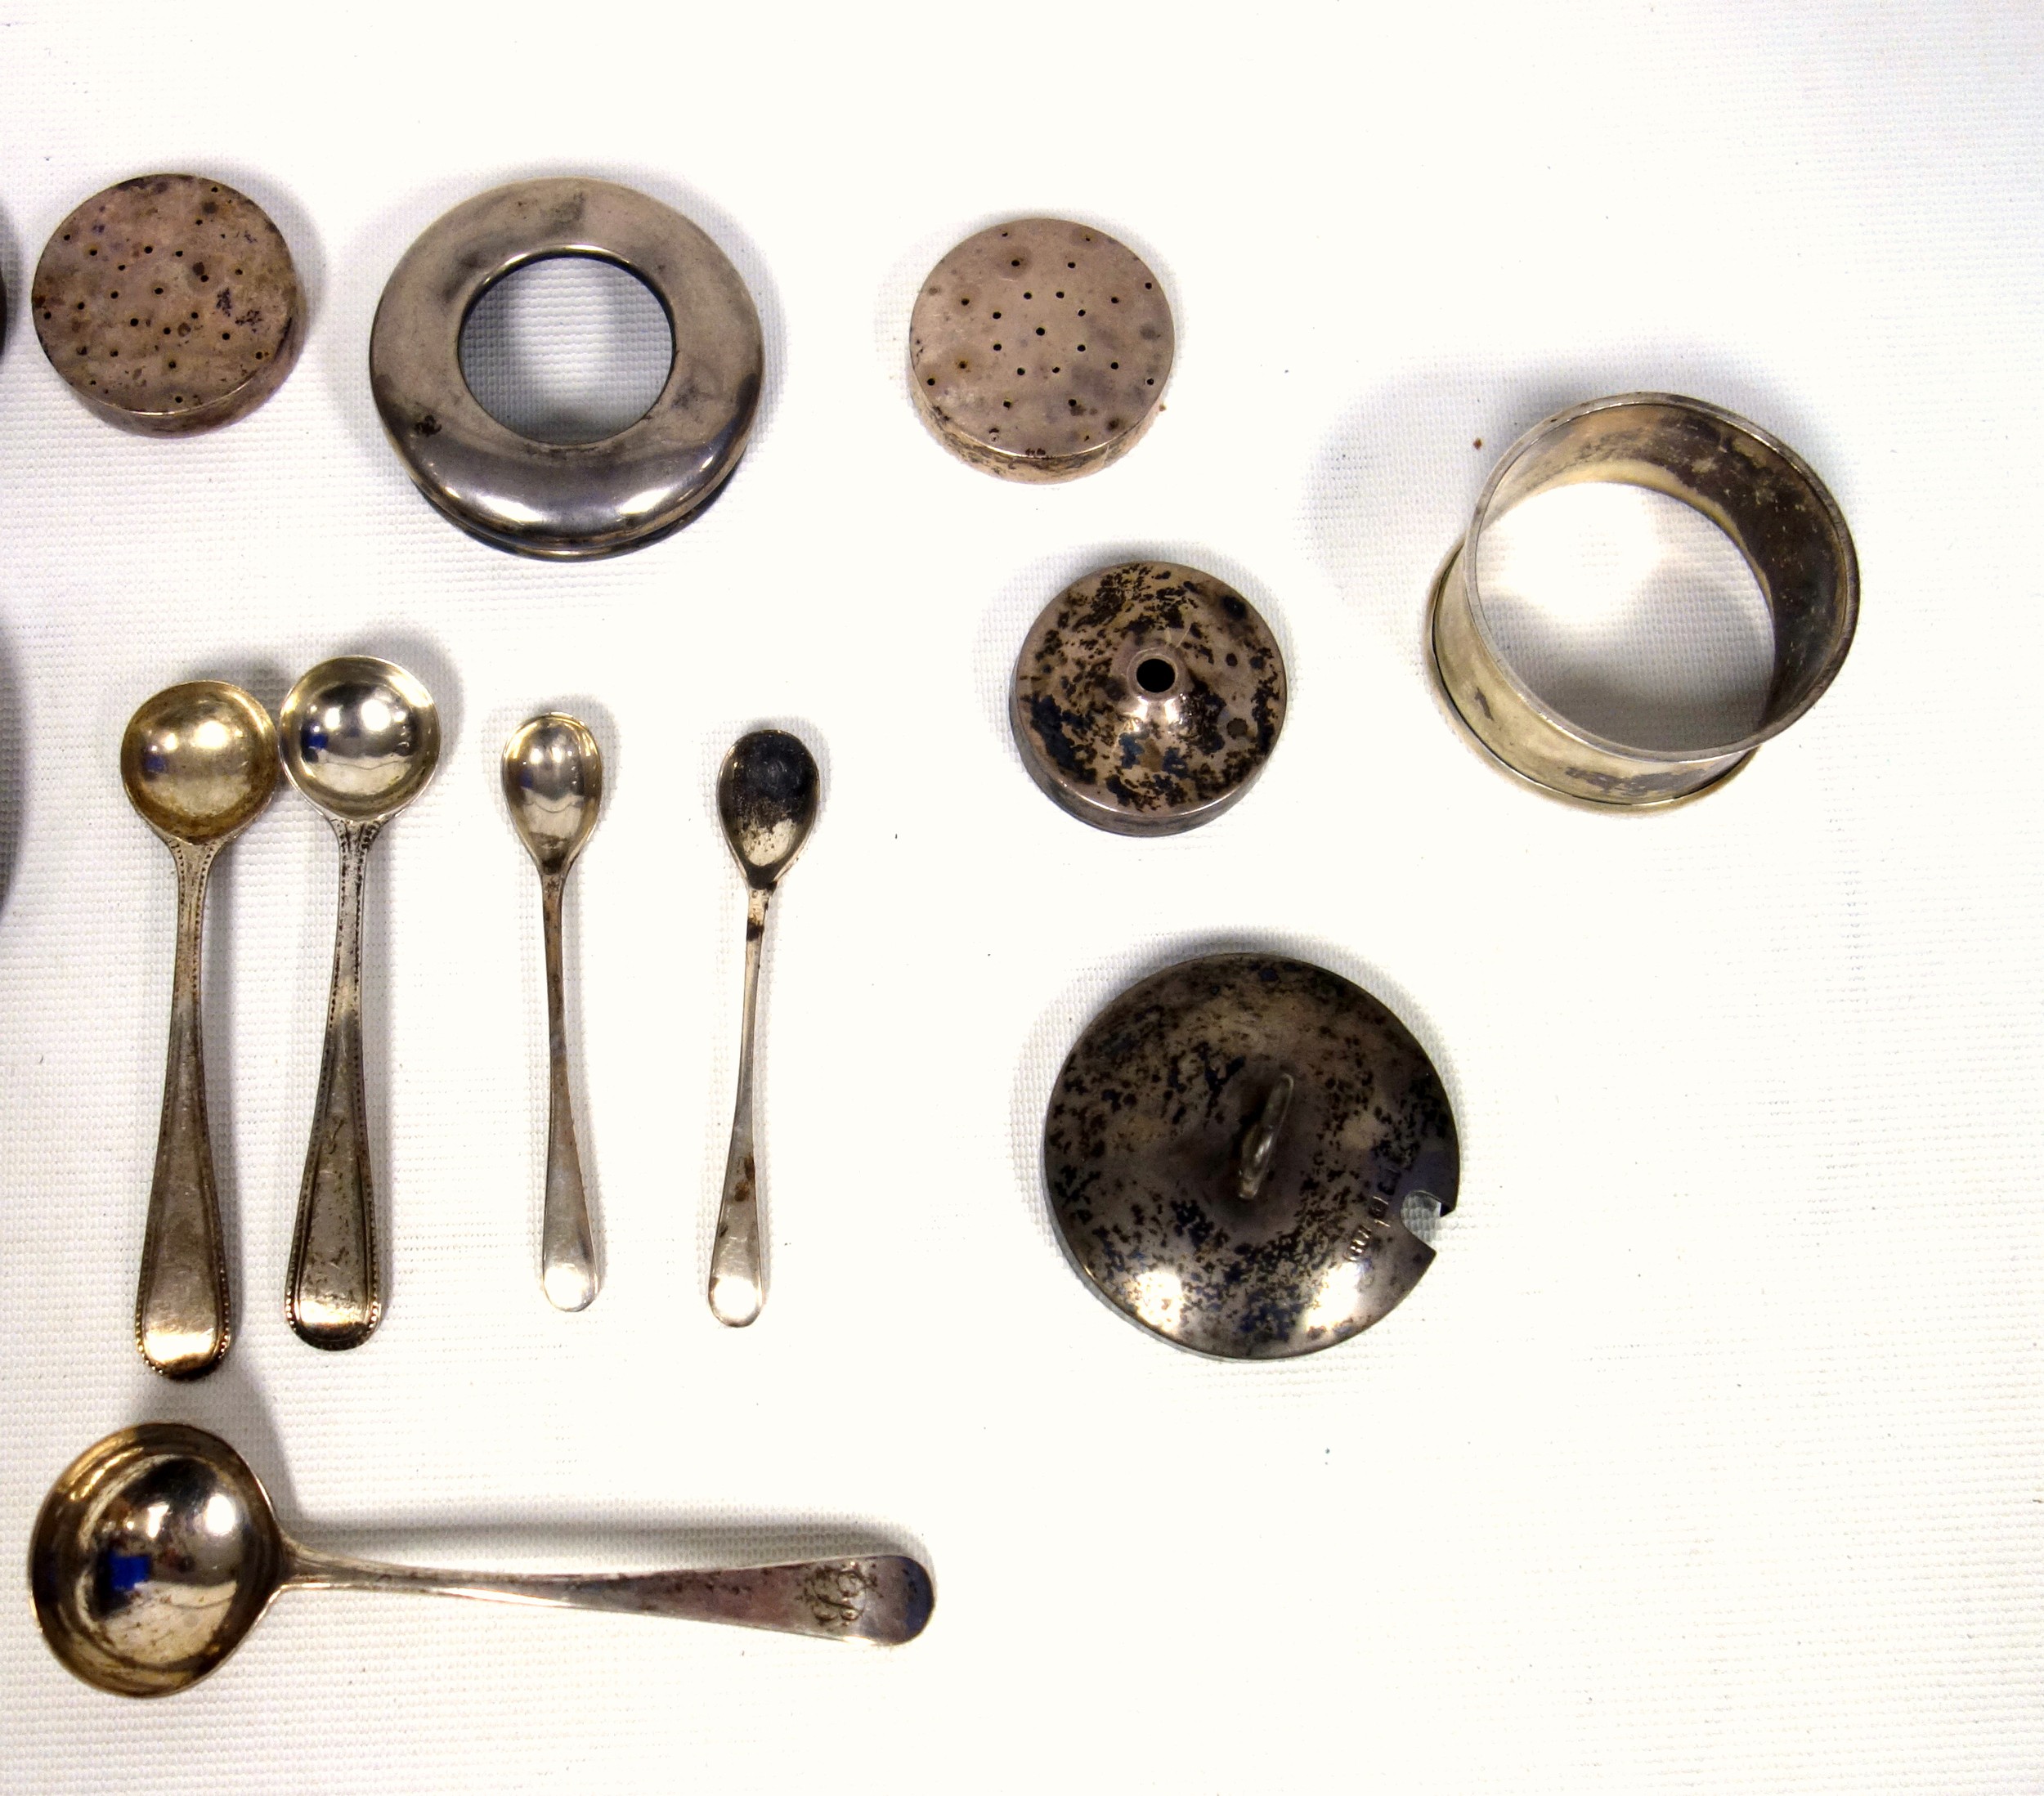 5 silver salt spoons, 5 coffee spoons, napkin ring, 5 condiment covers and a hair tidy cover, 158g - Image 3 of 3